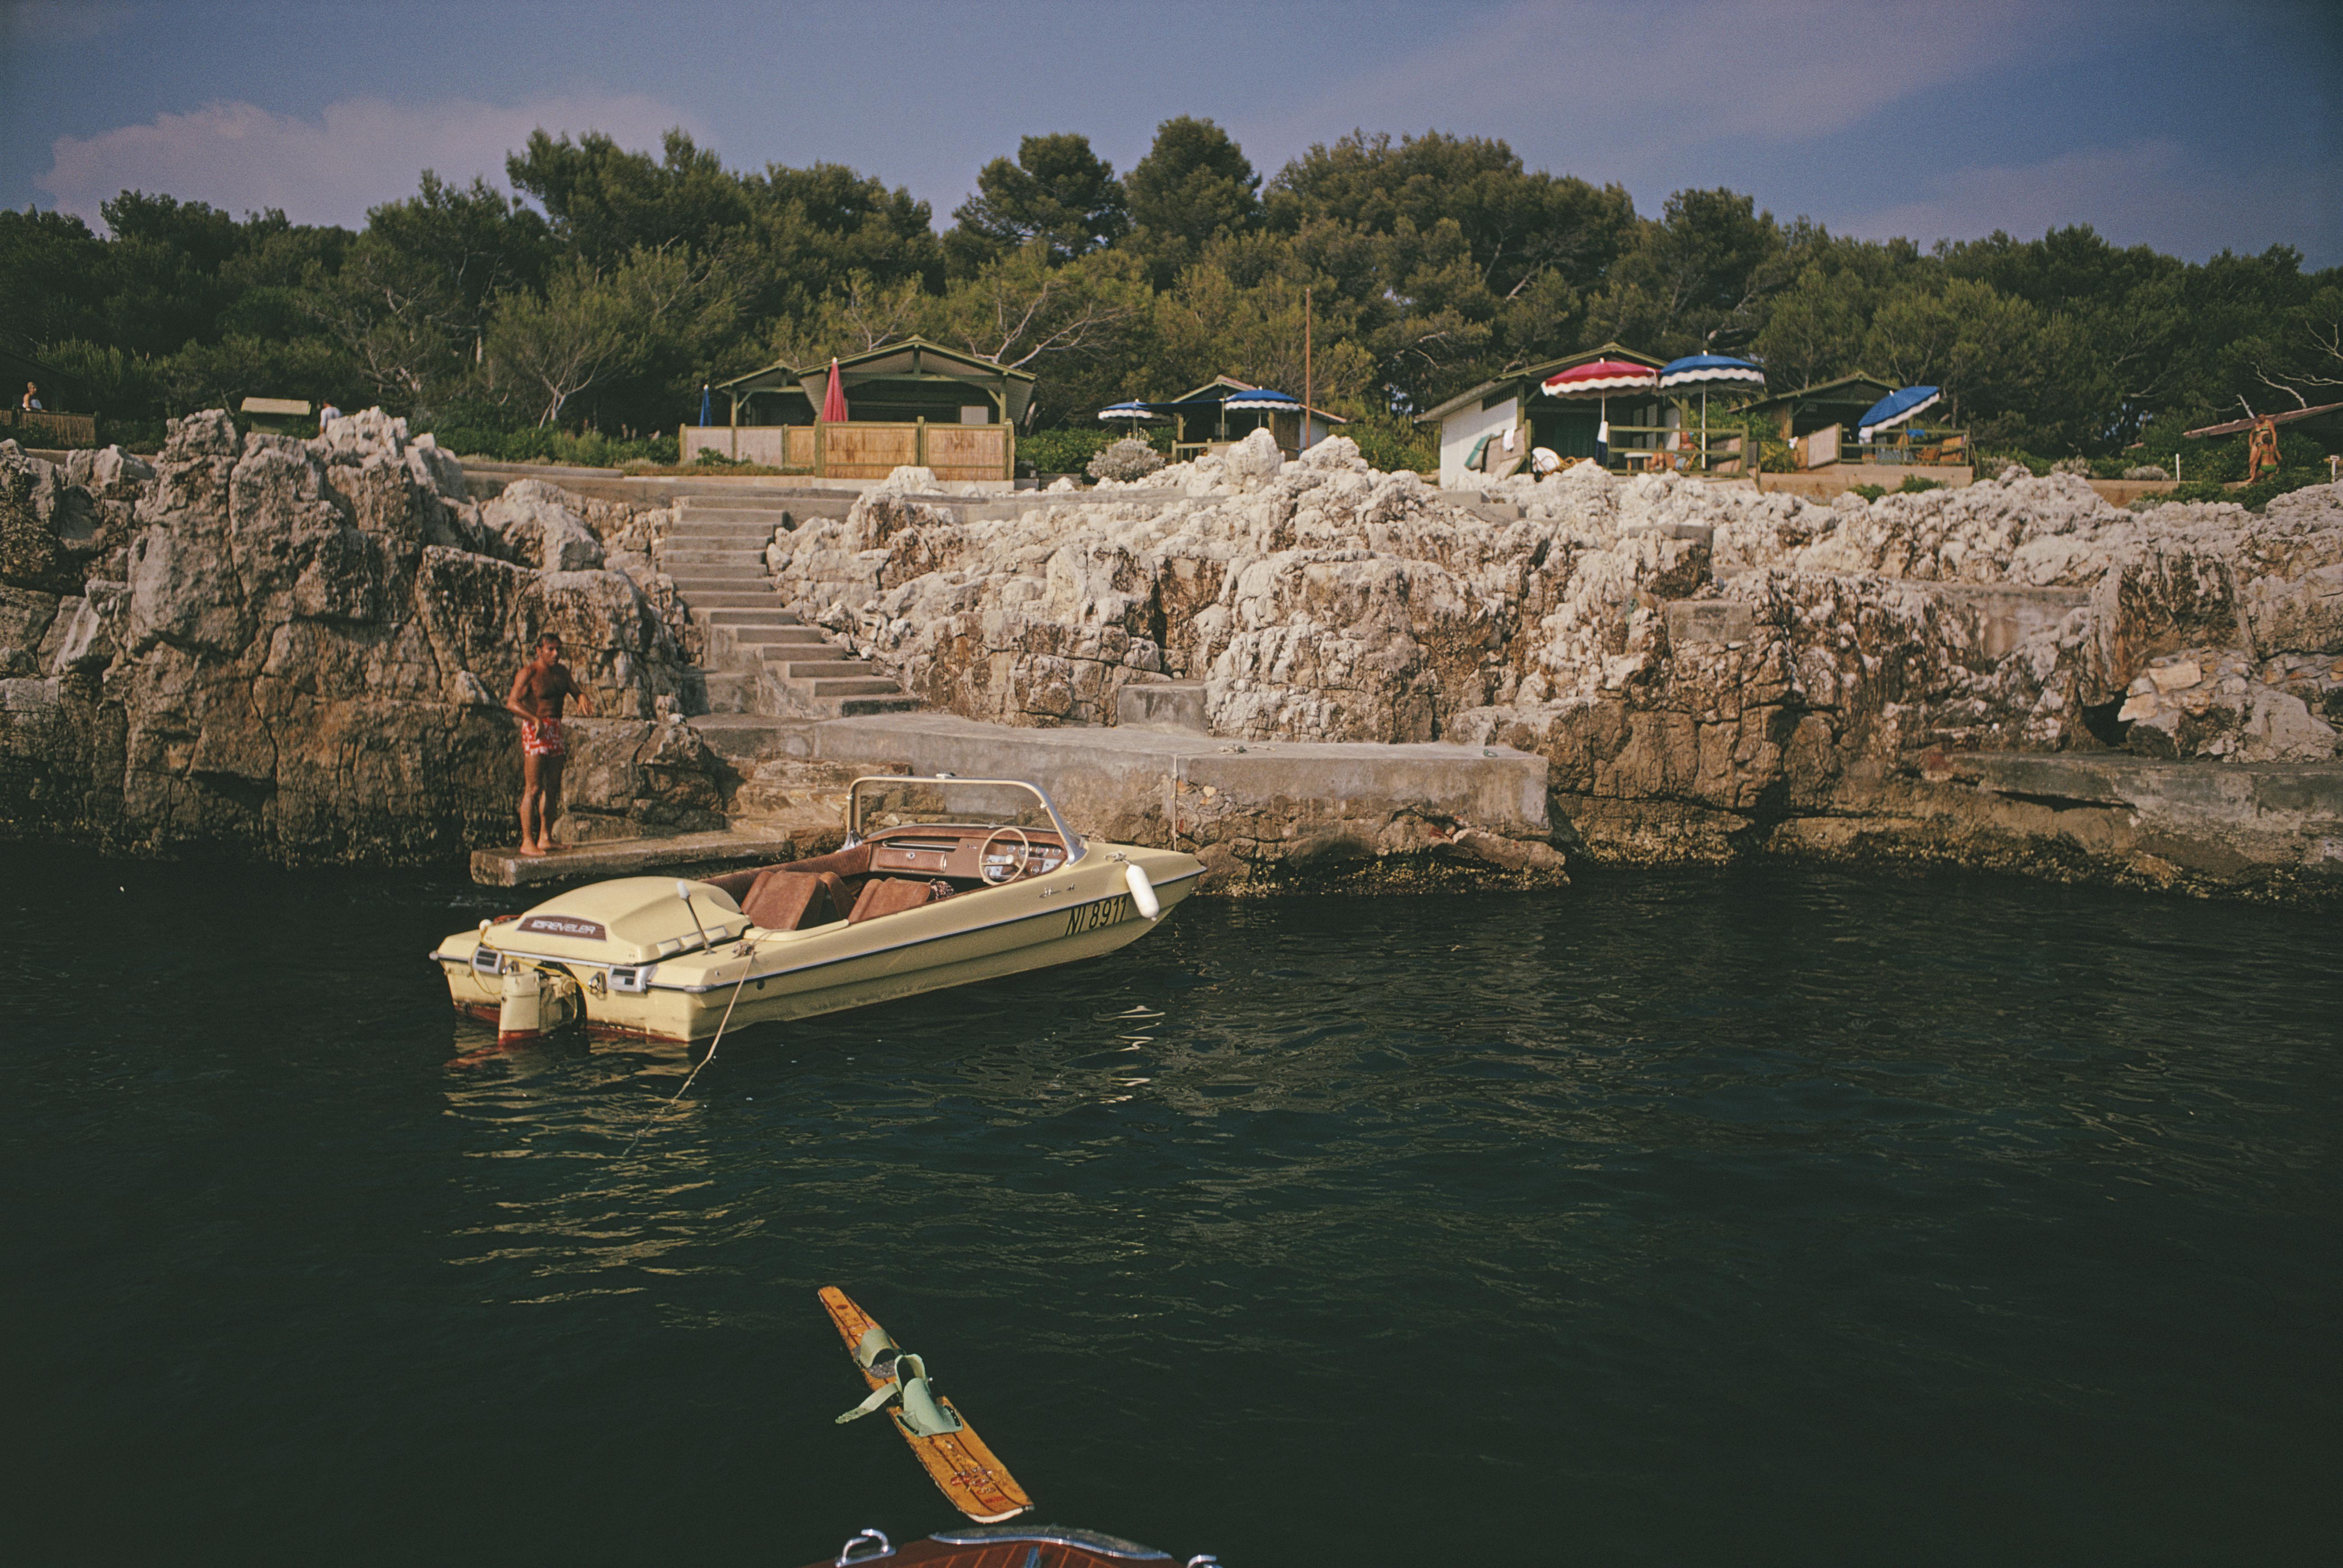 'Towboat At Hotel Du Cap-Eden-Roc' 1969 Slim Aarons Limited Estate Edition Print 

A motorboat, used to tow waterskiiers, moored at the Hotel du Cap-Eden-Roc in Antibes on the French Riviera, August 1969.

Produced from the original